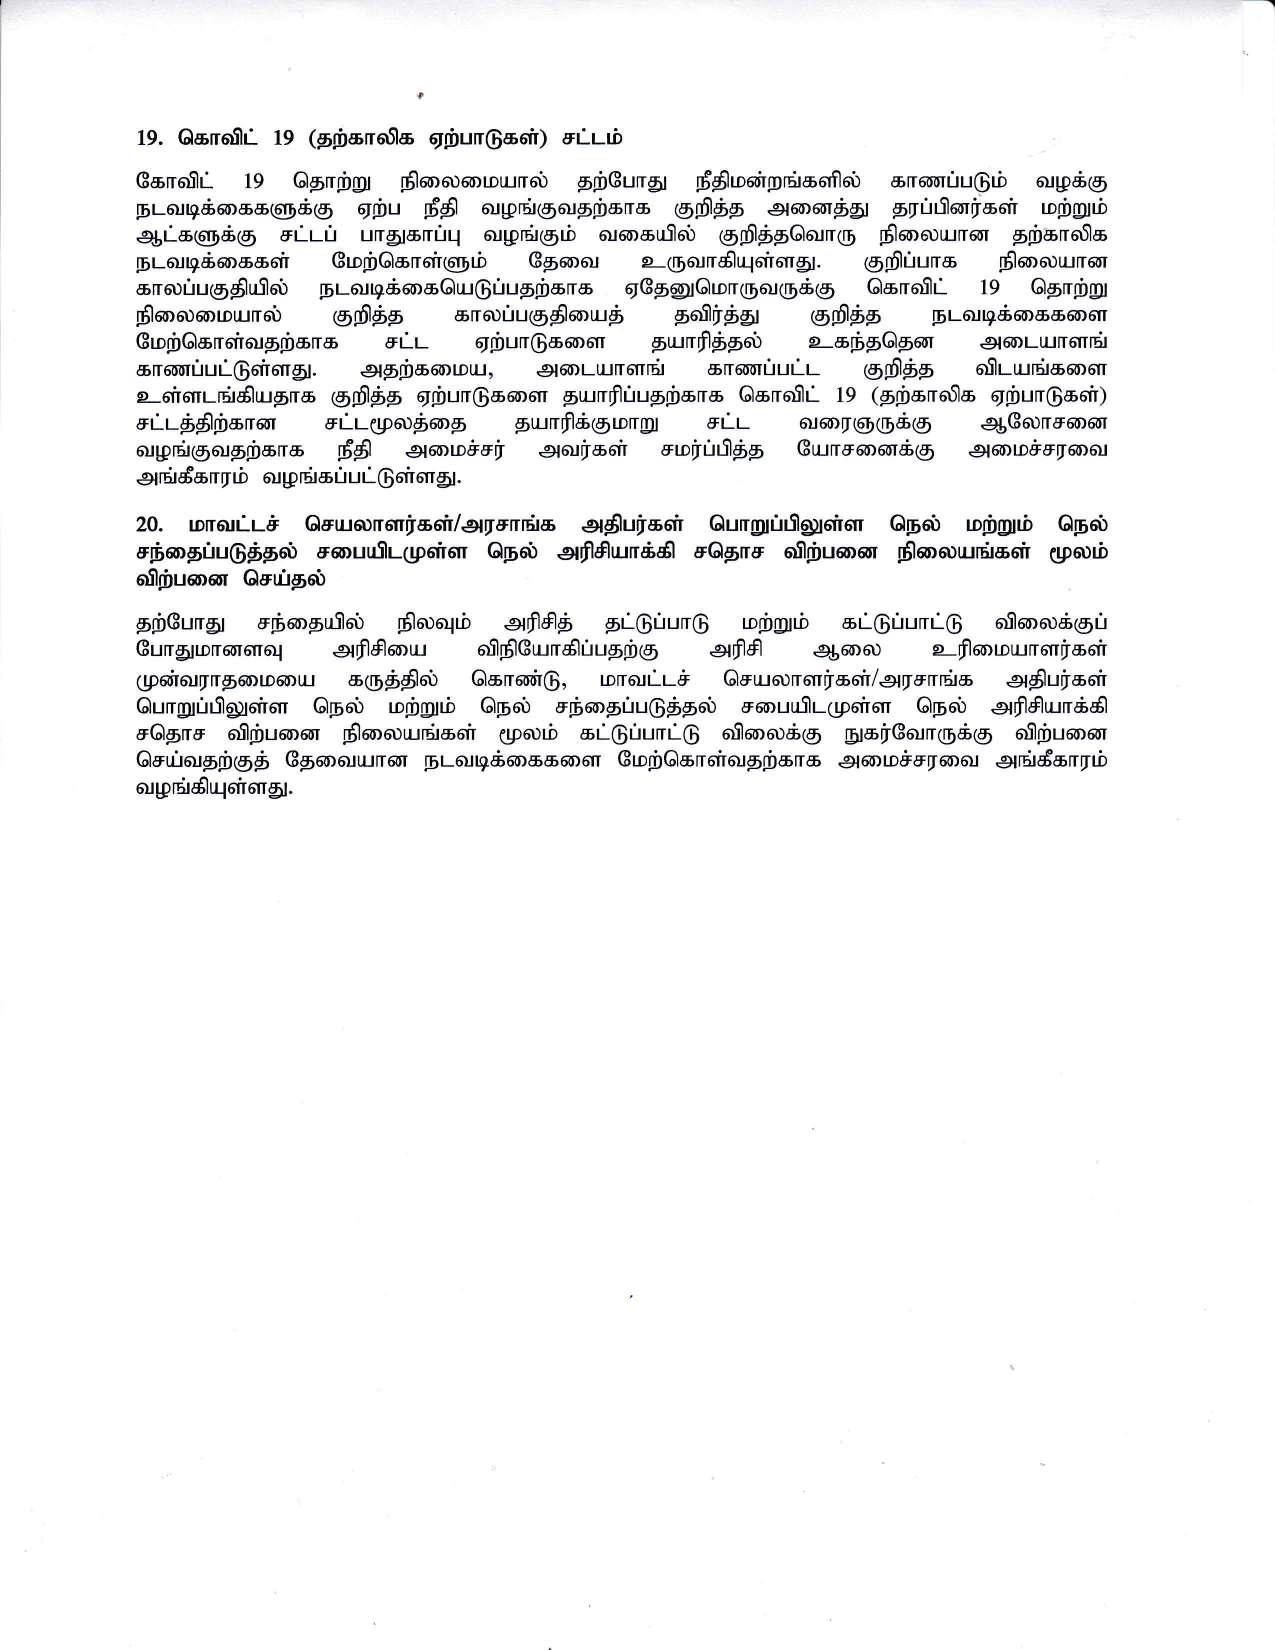 Cabinet Decsion on 09.11.2020 Tamil page 007